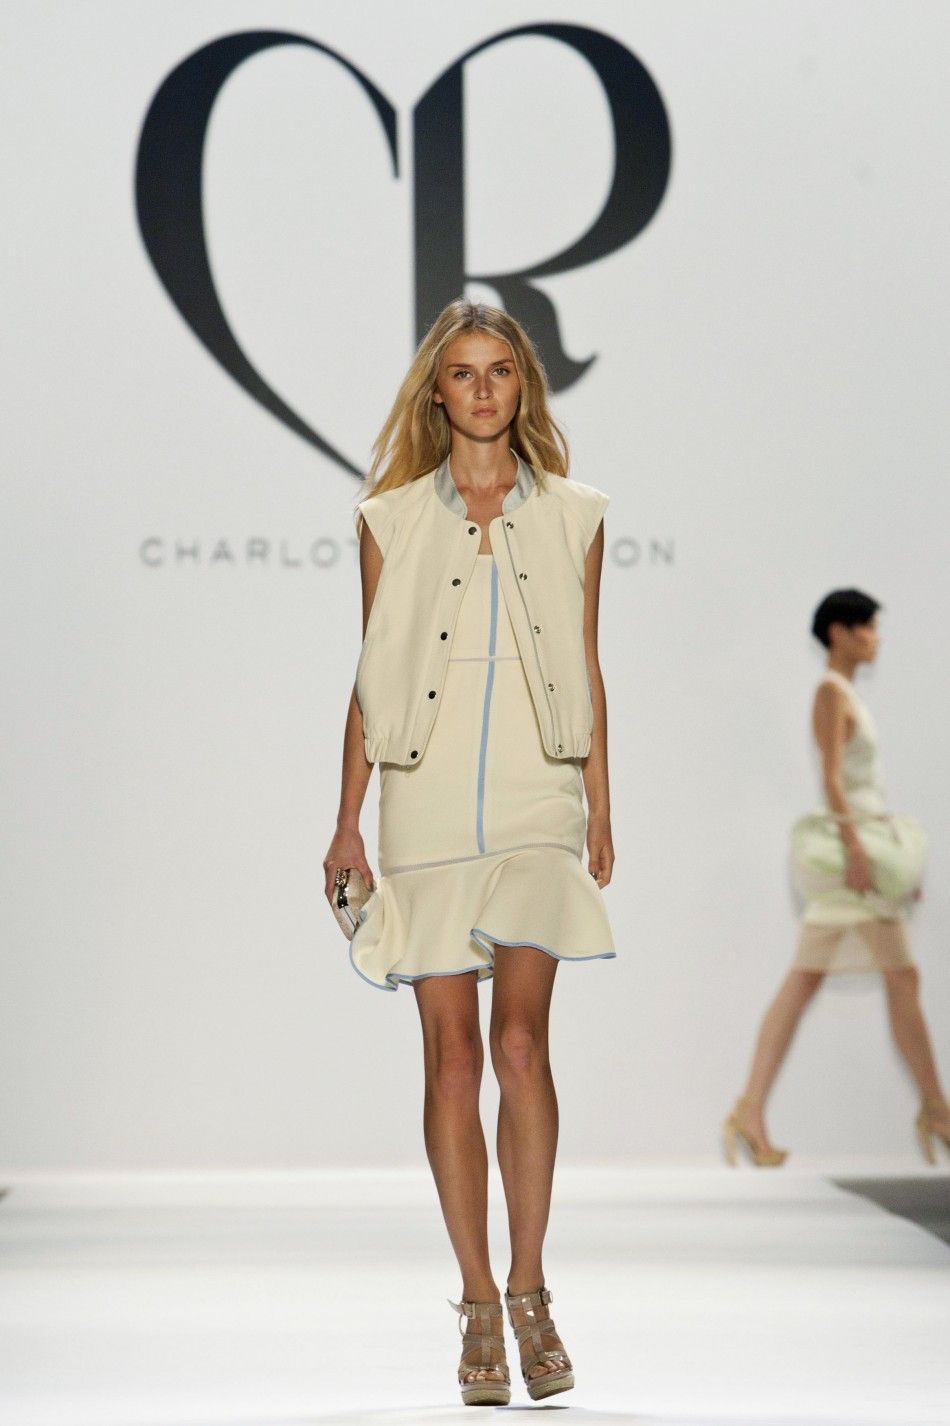 Designer Charlotte Ronson said water was her inspiration for her Spring 2013 collection ahead of Mercedes-Benz Fashion Week in New York, which was shown on Friday at the wall-to-wall and celebrity packed stage.